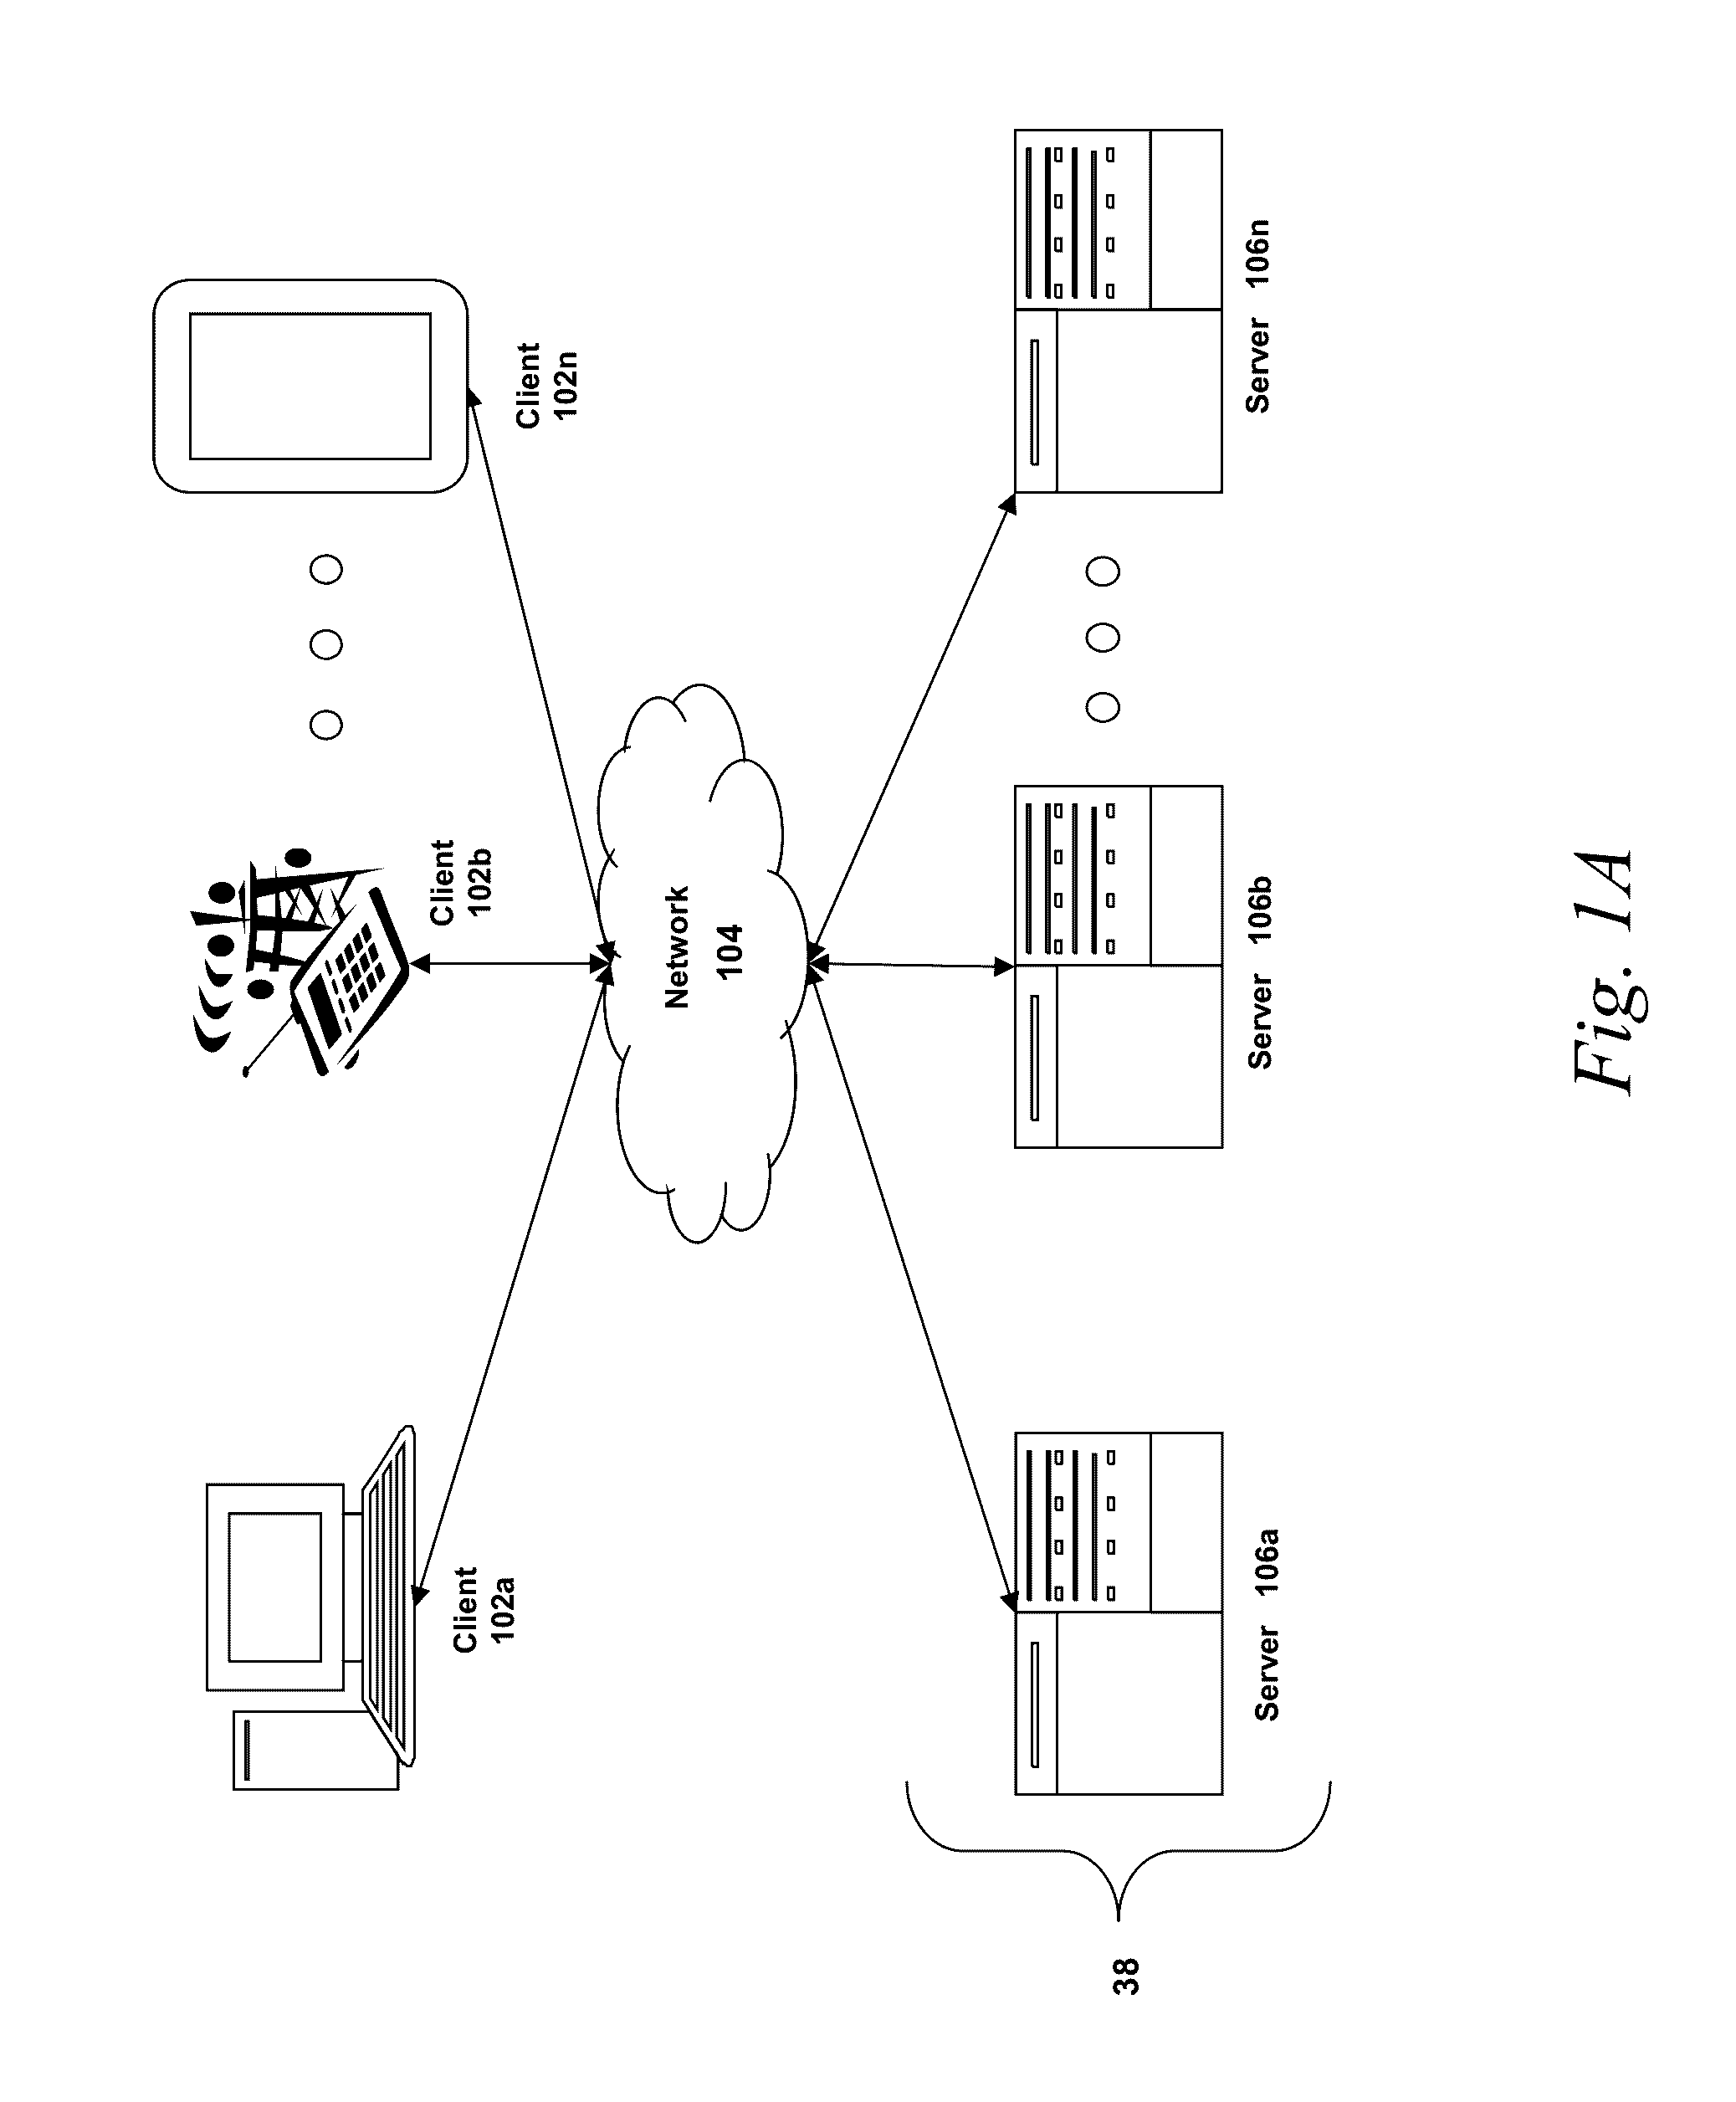 Systems and methods for screenshot linking